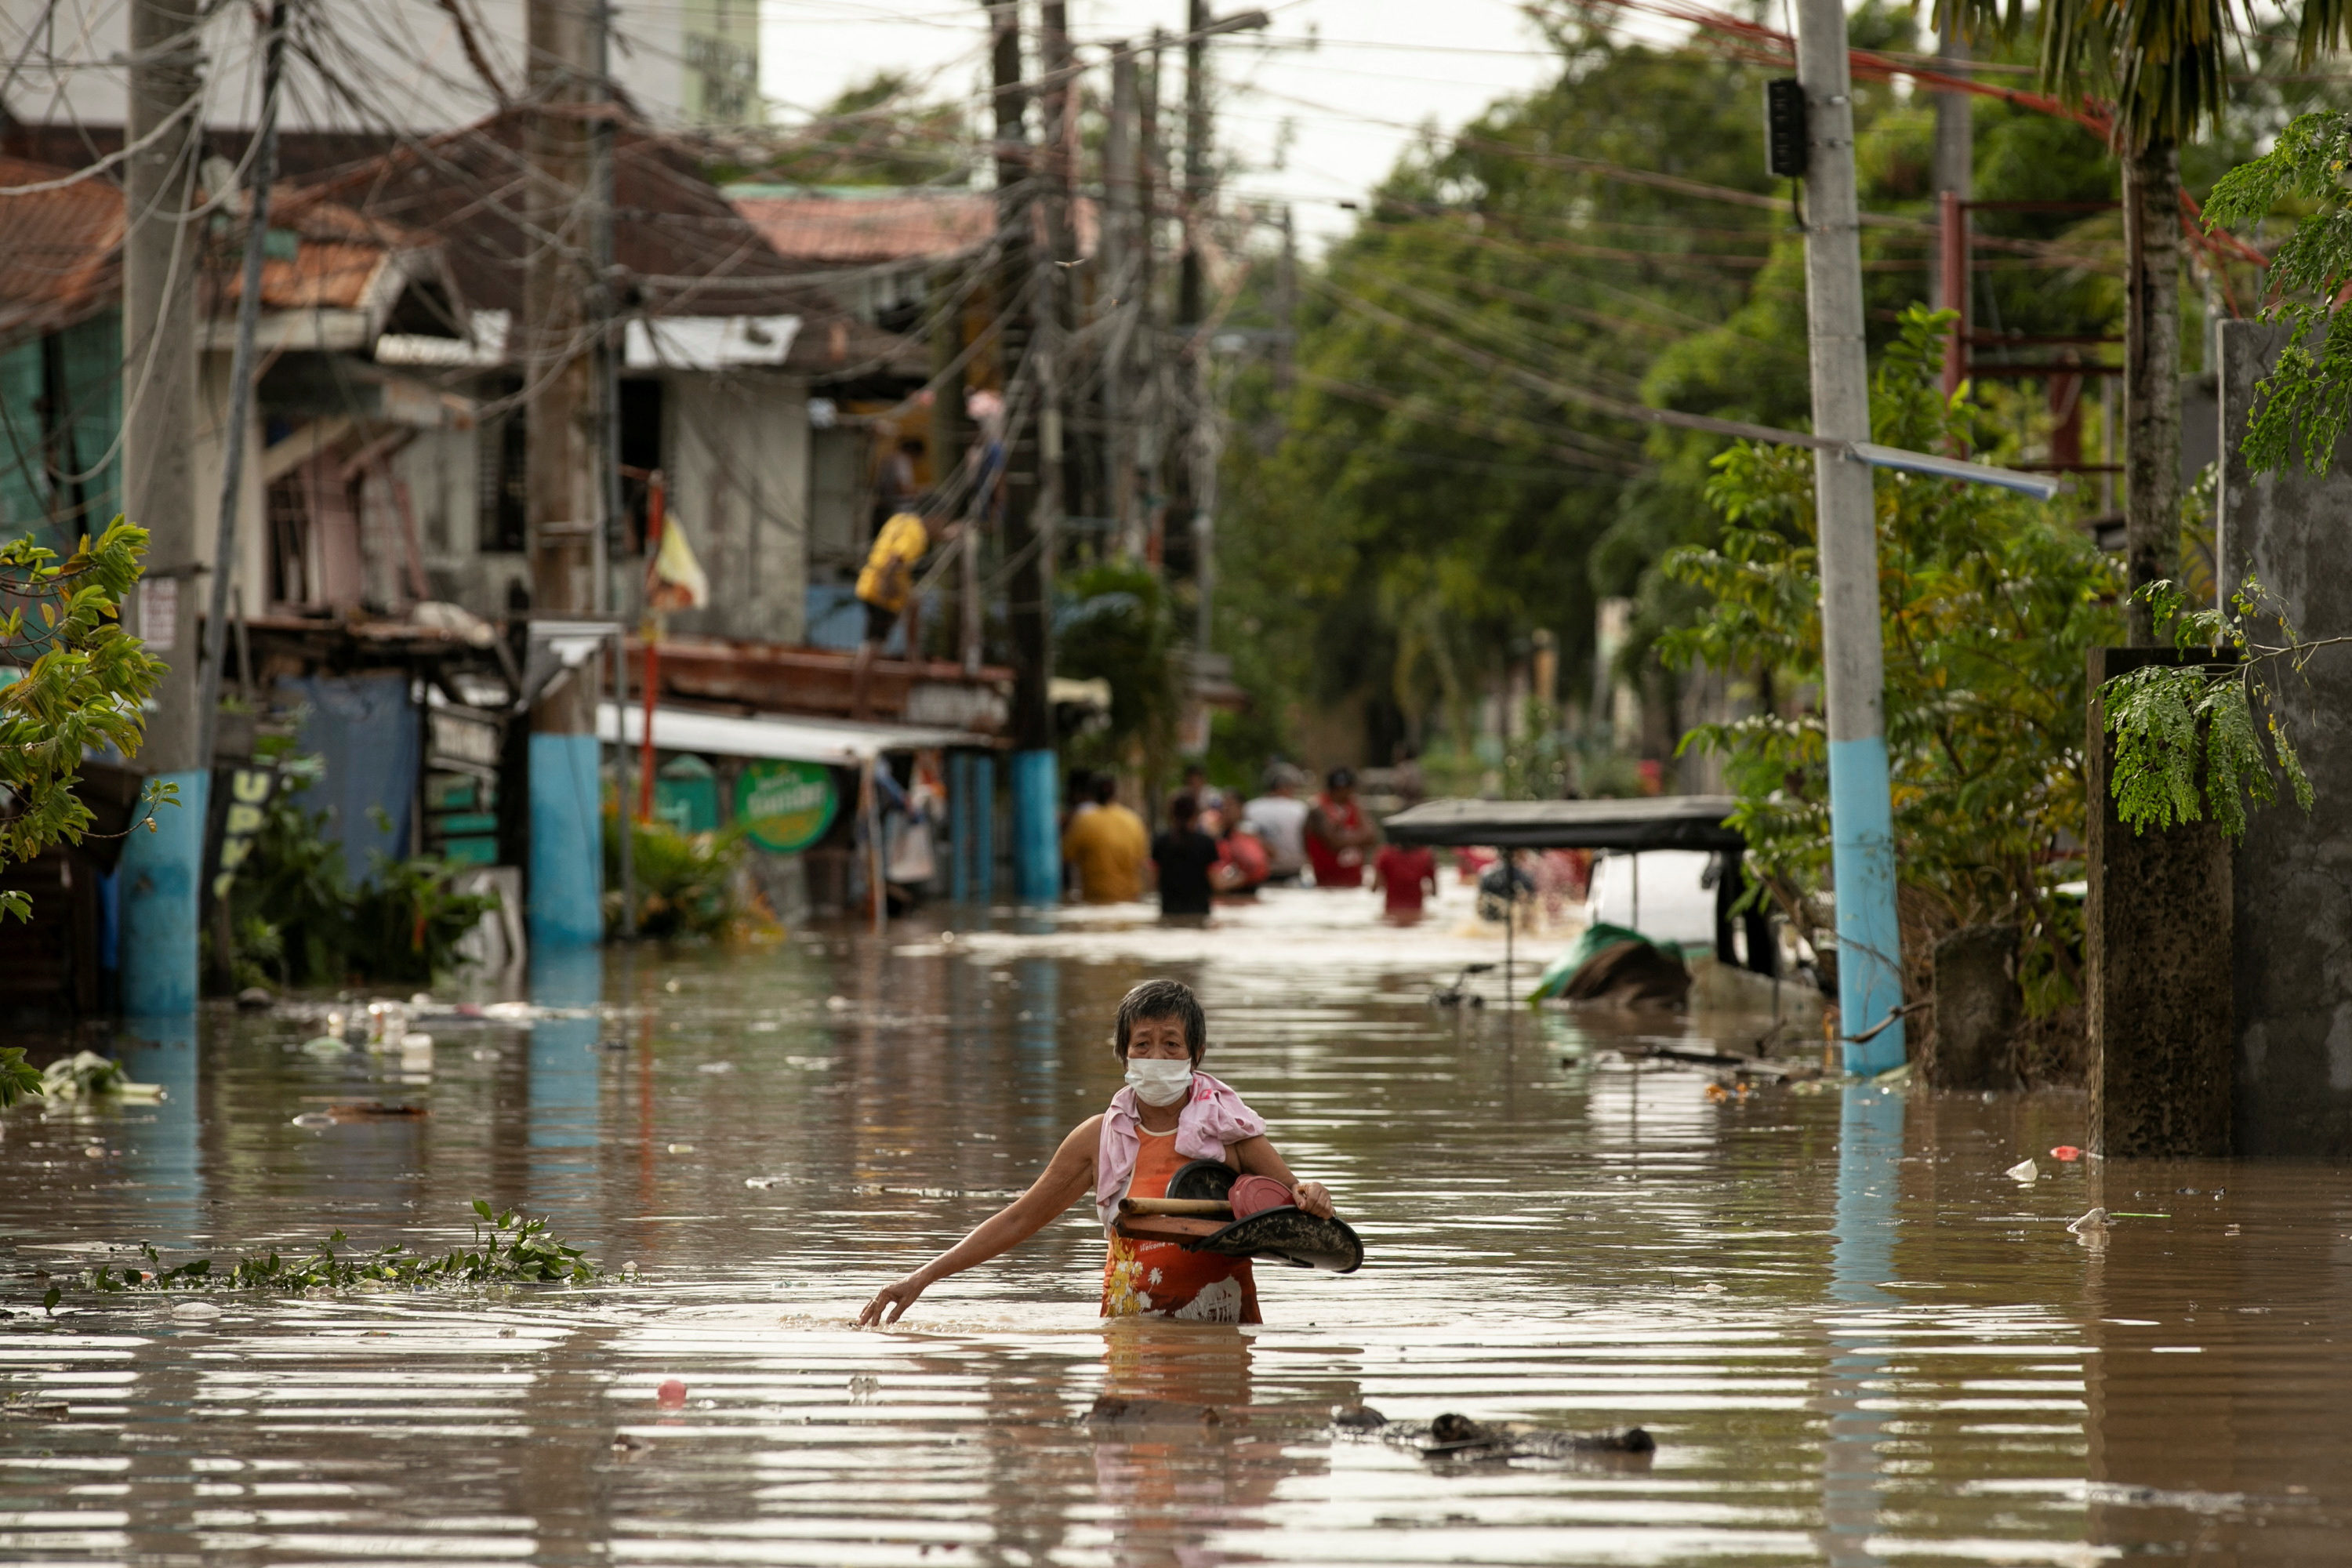 Swathes of land swamped in Philippines after typhoon Reuters